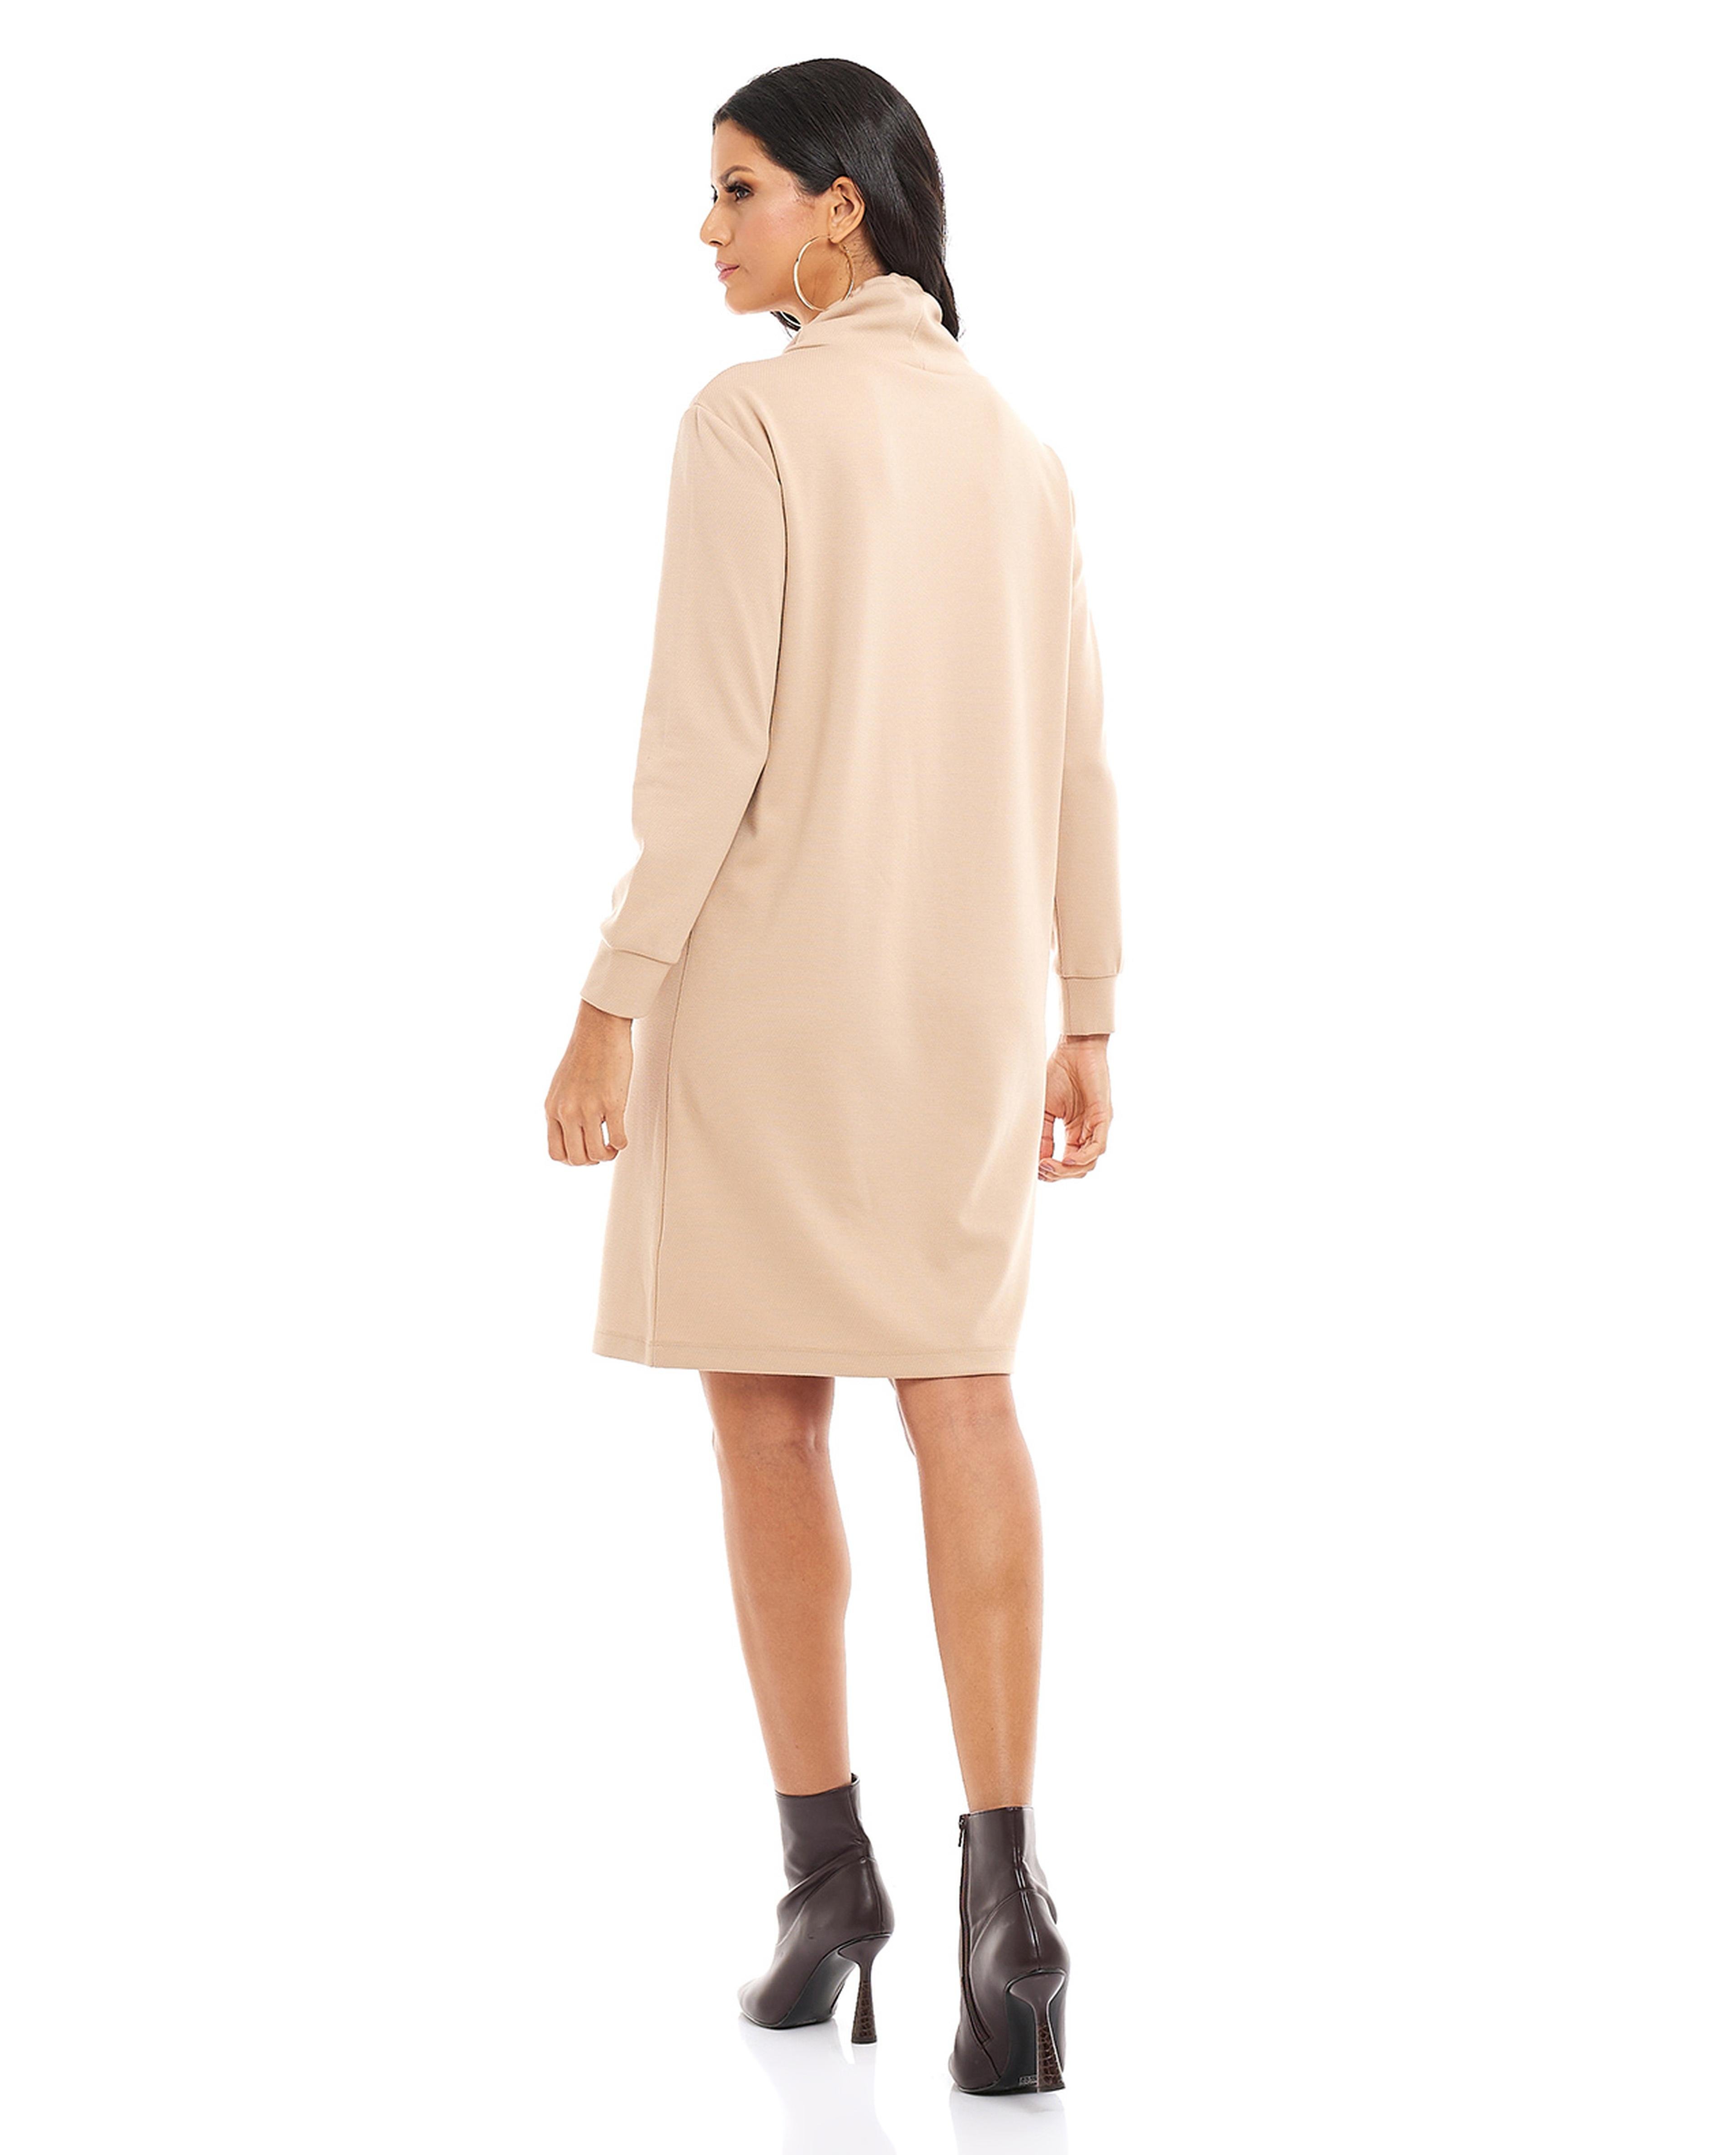 Solid Sweatdress with Long Sleeves